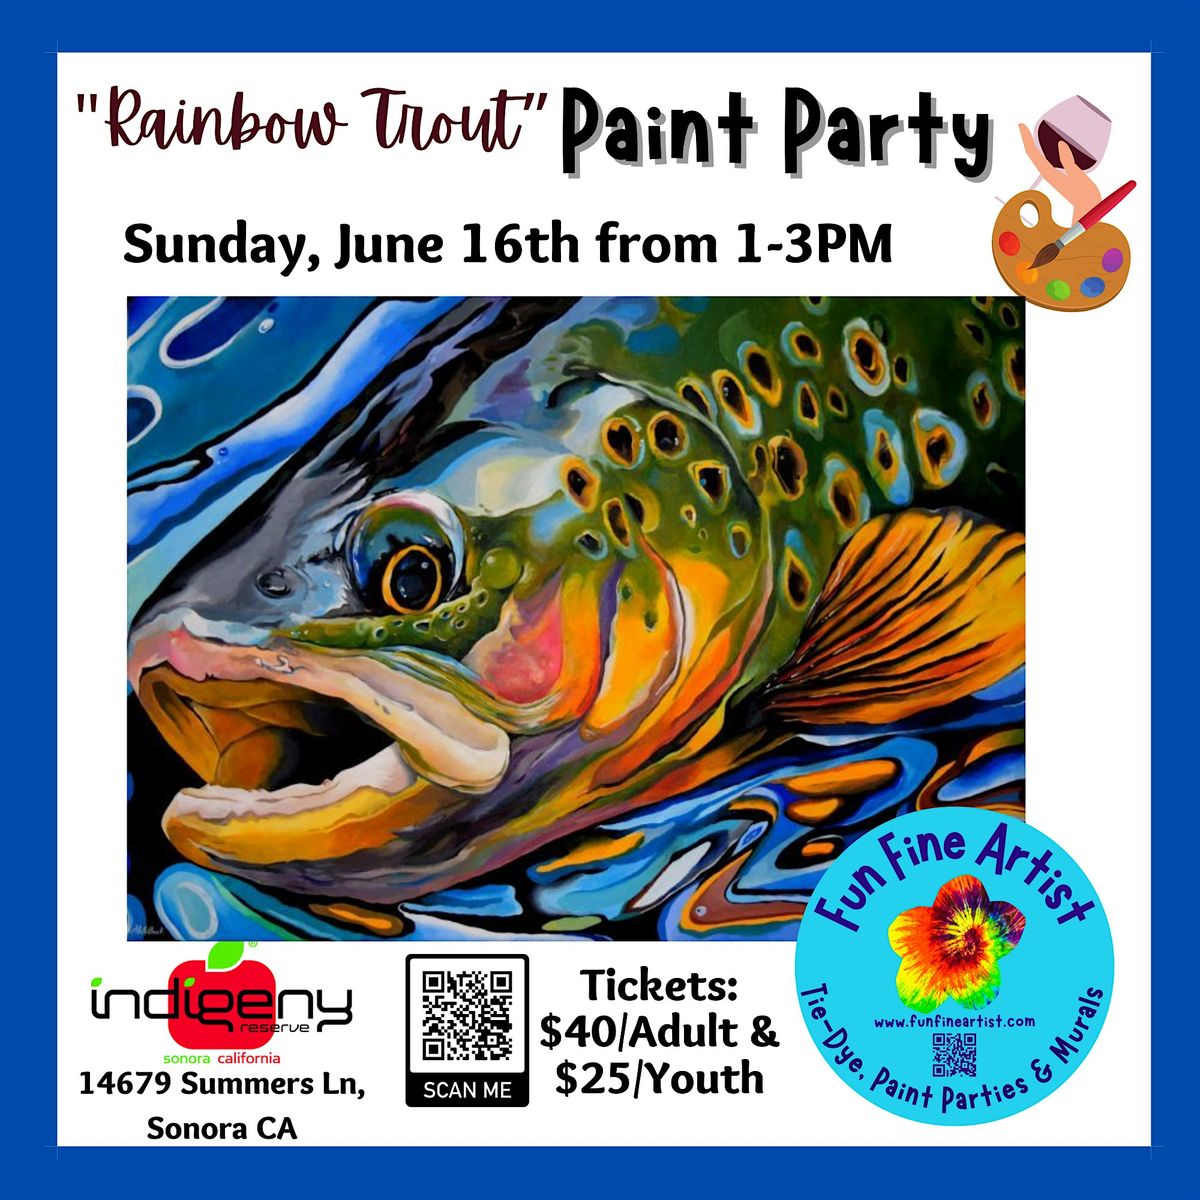 \u201cRainbow Trout"  Paint Party @ Indigeny Reserve